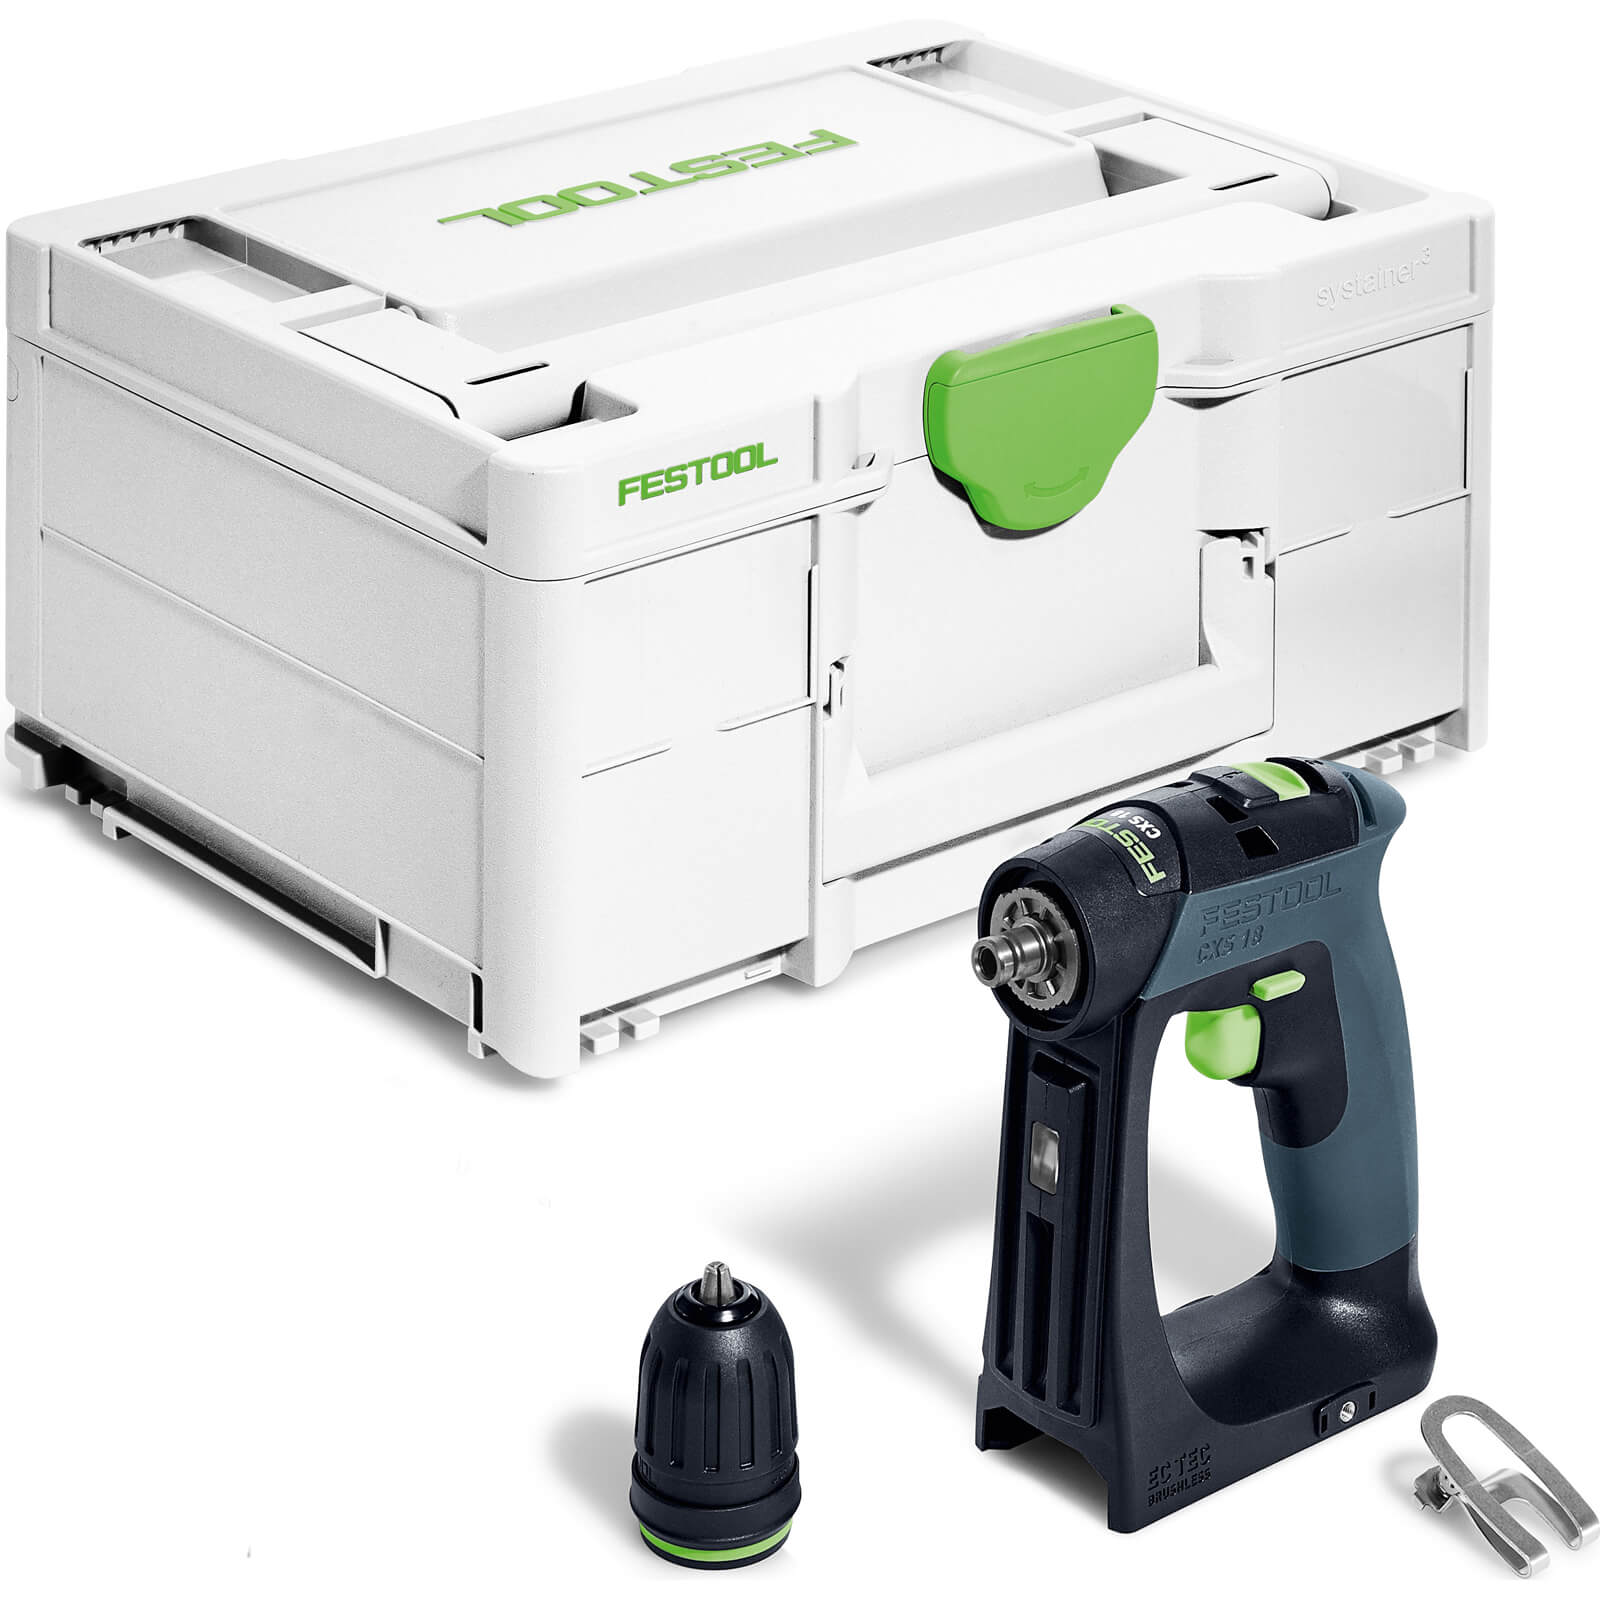 Image of Festool CXS 18 18v Cordless Brushless Drill Driver No Batteries No Charger Case